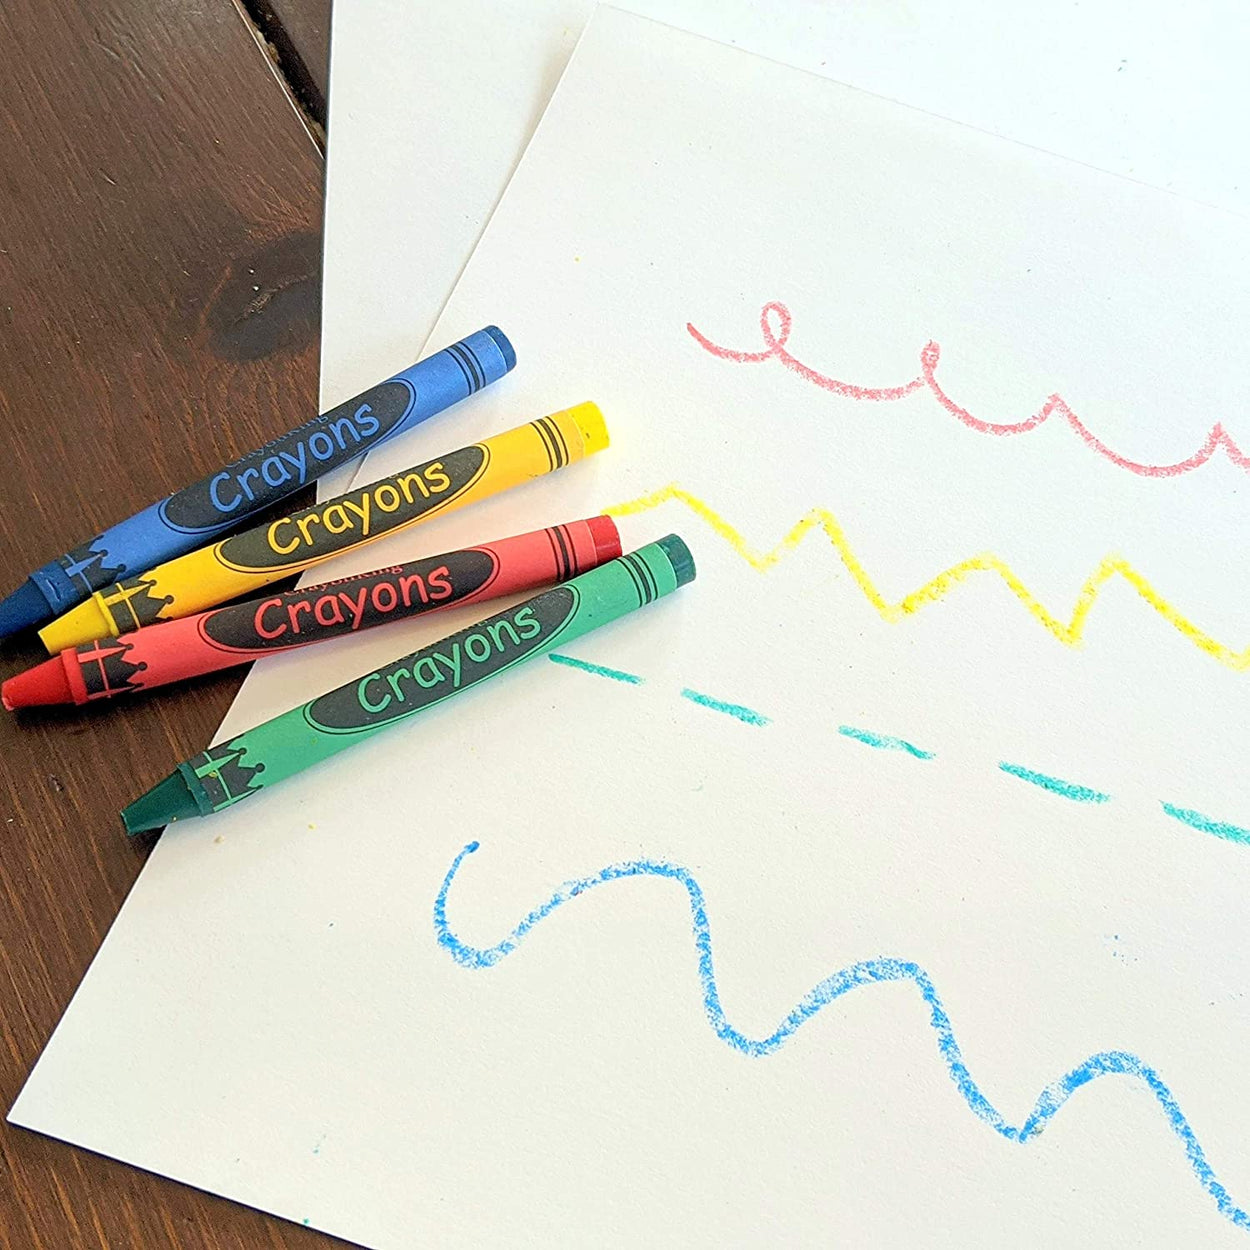 Wholesale twistable crayons in bulk For Drawing, Writing and